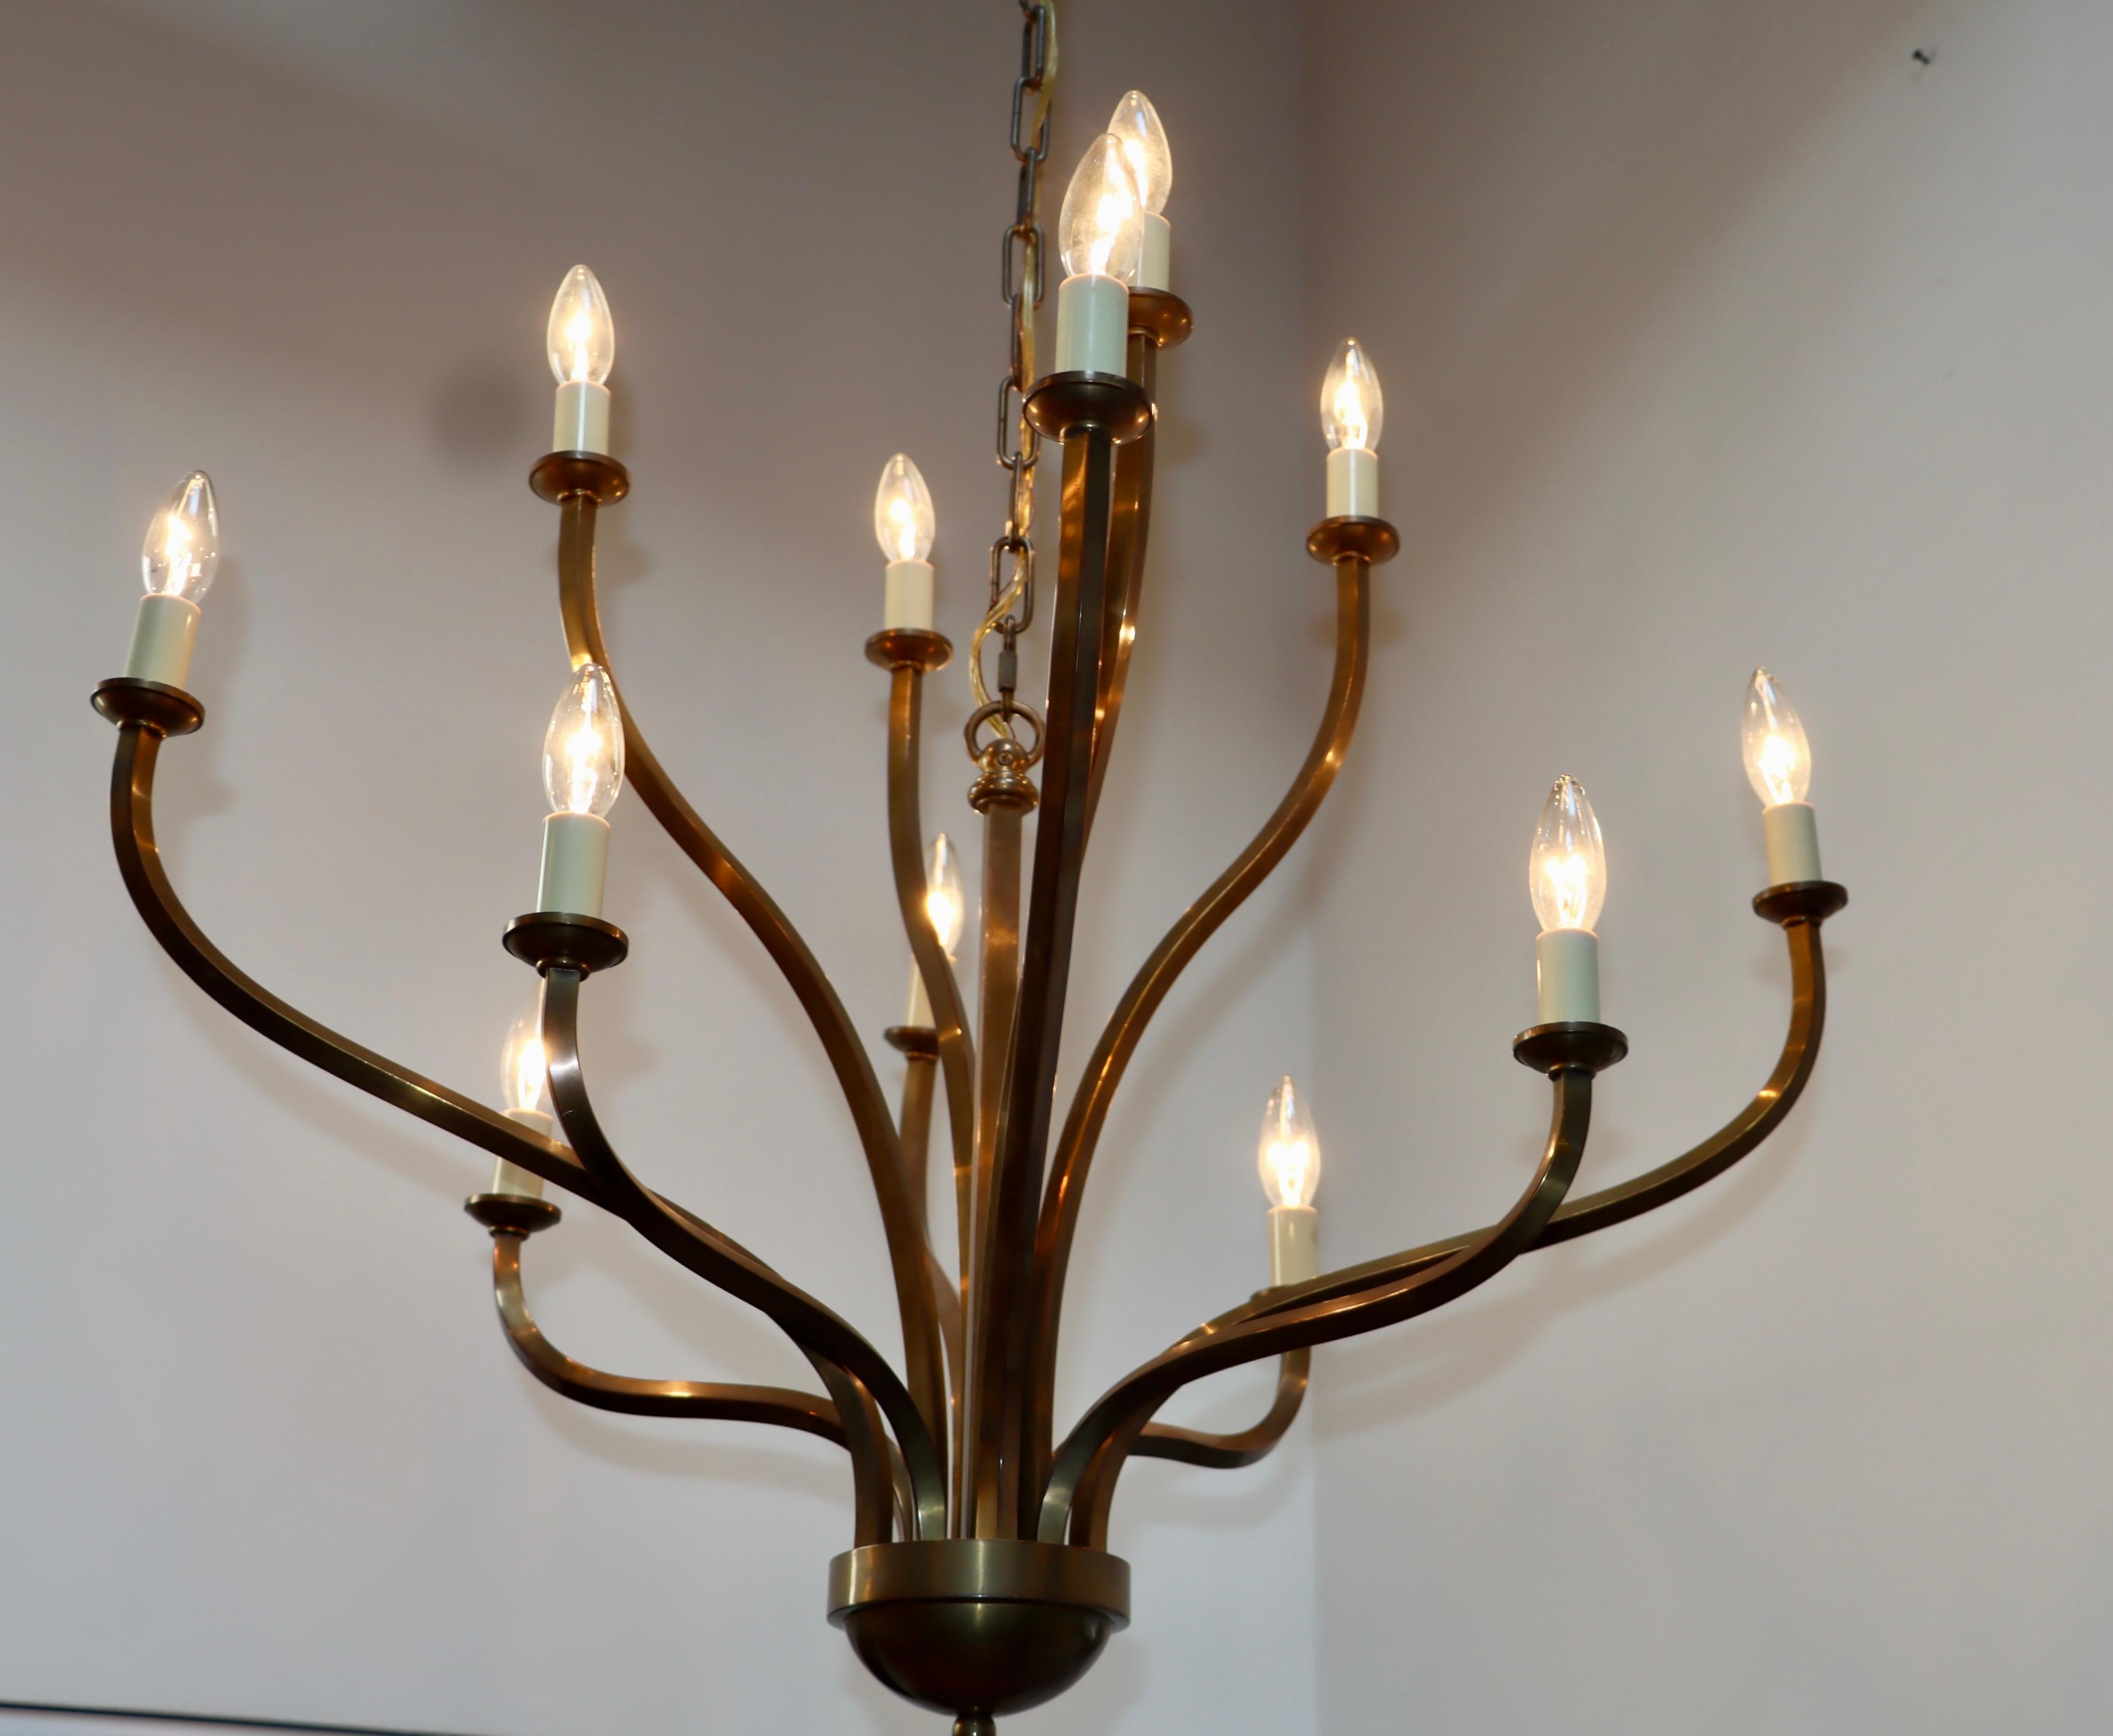 1970s Patinated Brass 12 Arm Chandelier Attributed to Hart Associates For Sale 4